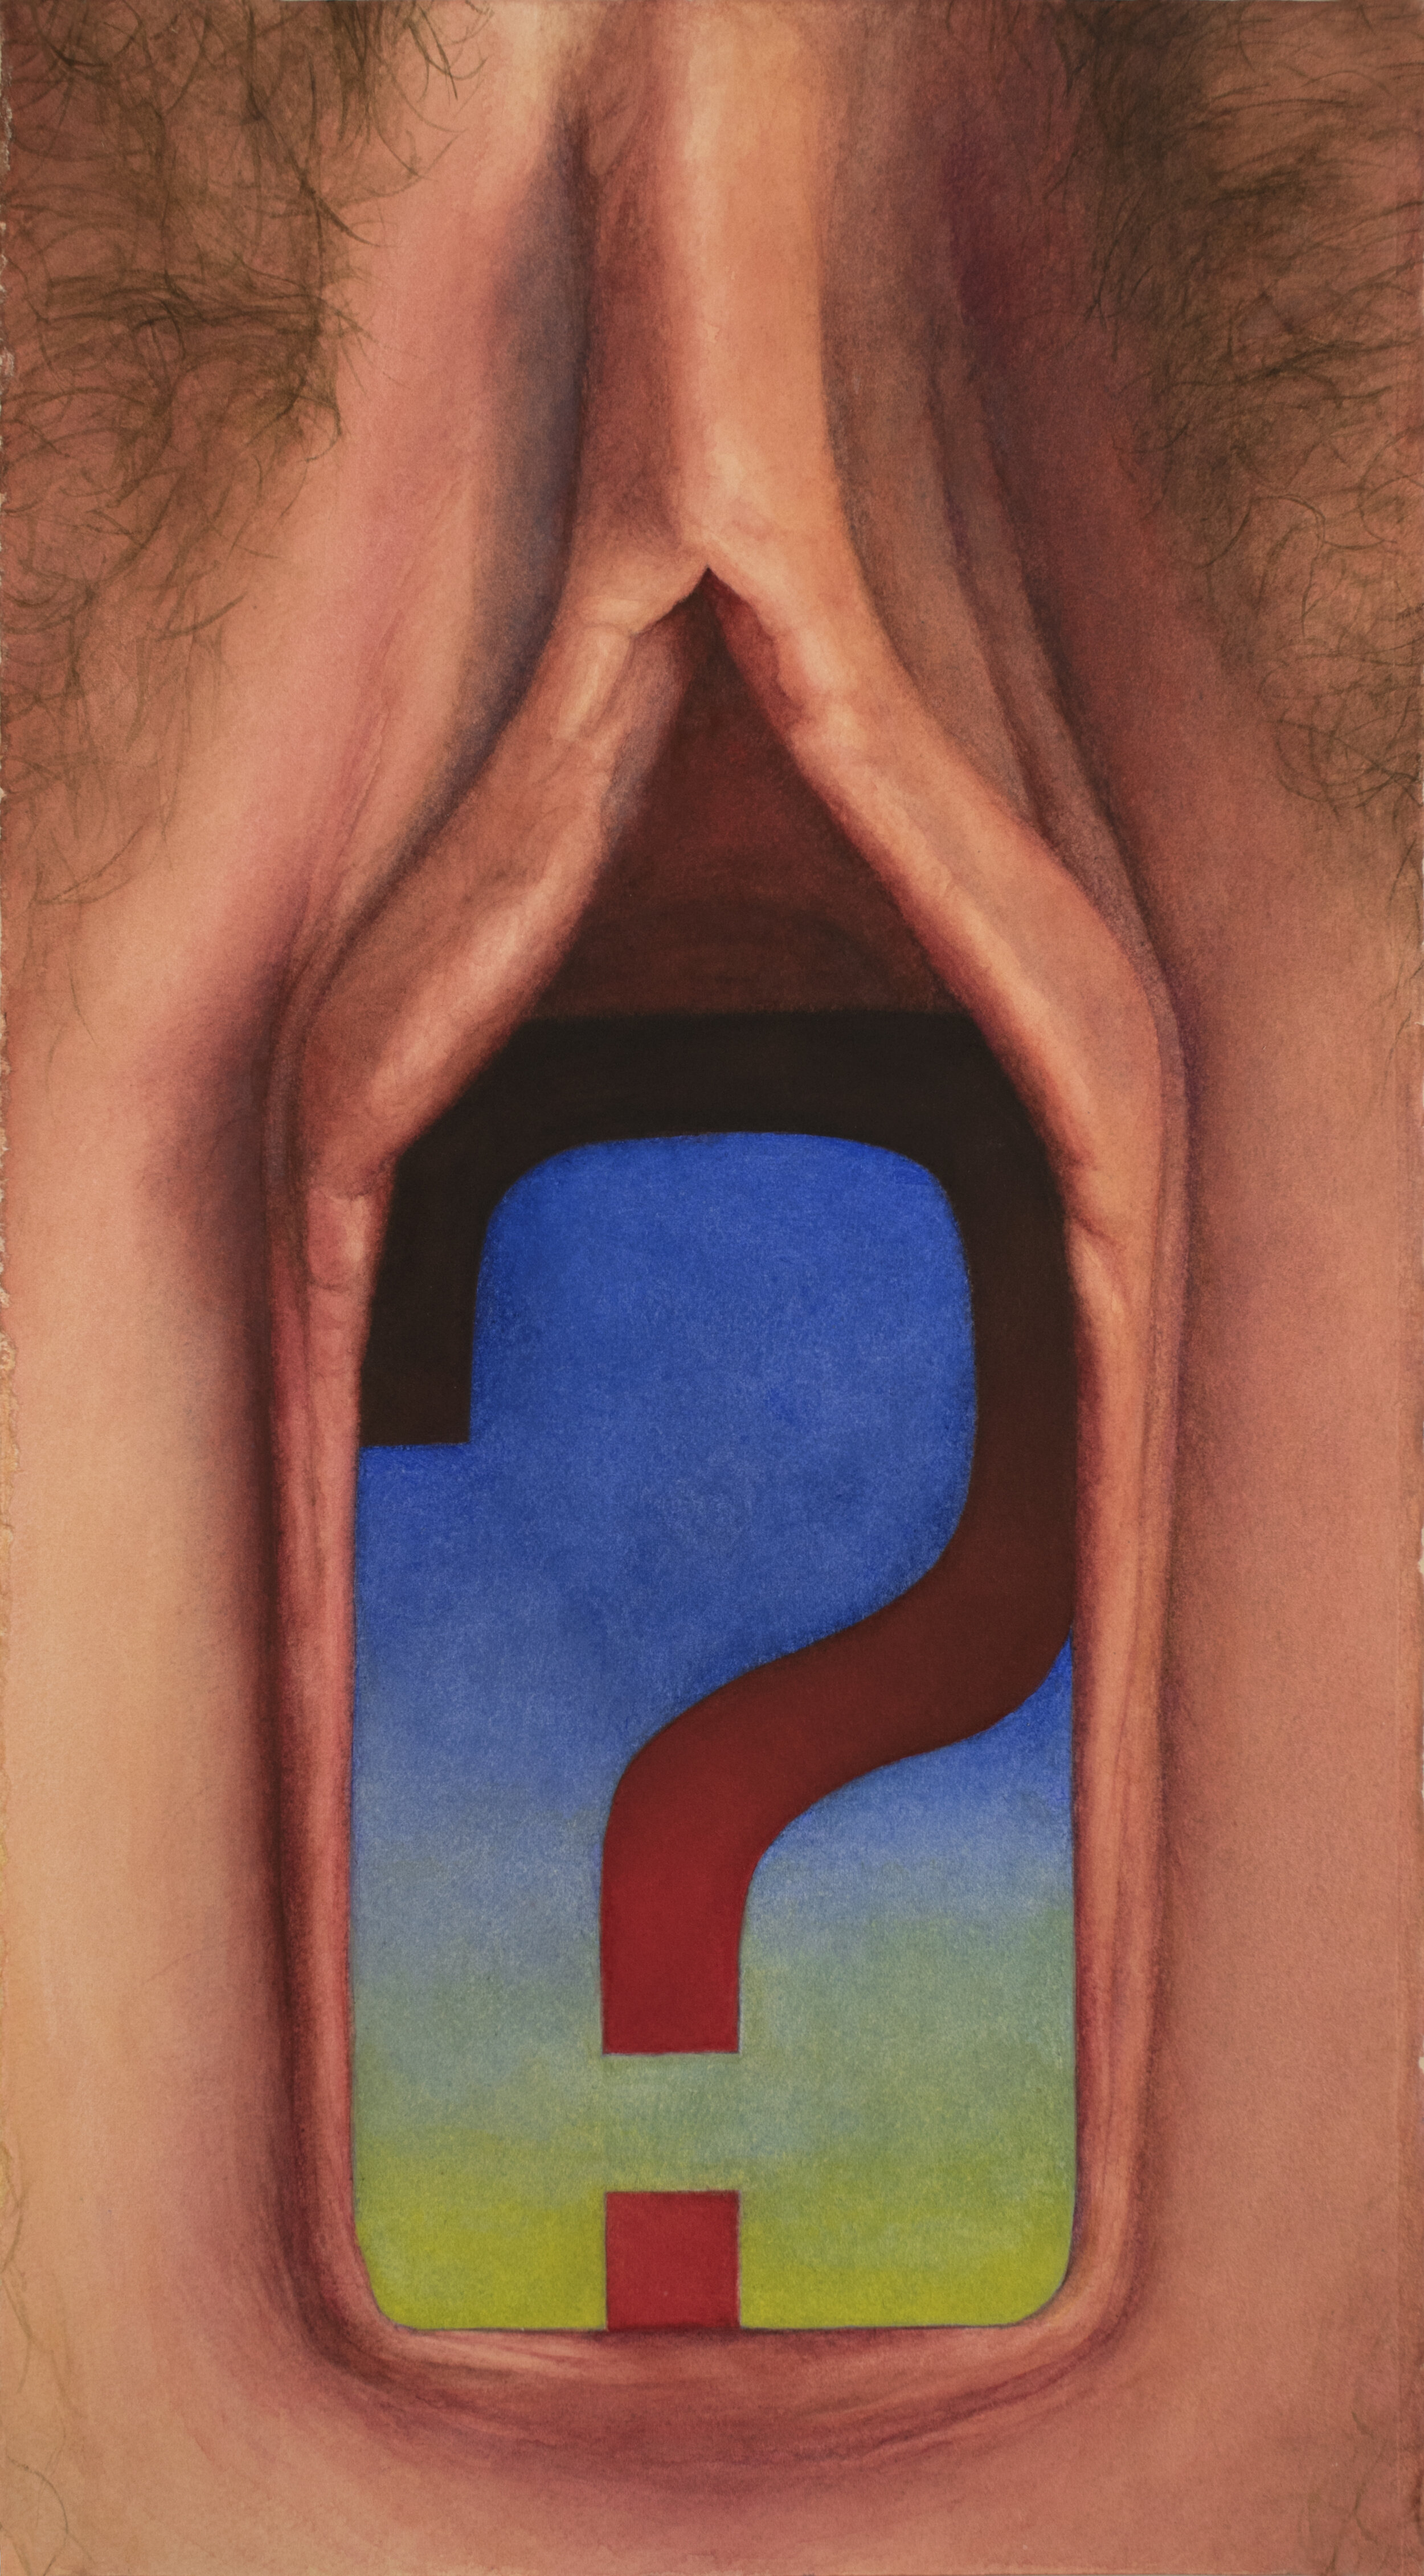   {?, vagina} , watercolor on paper, 11 x 19 3/4 